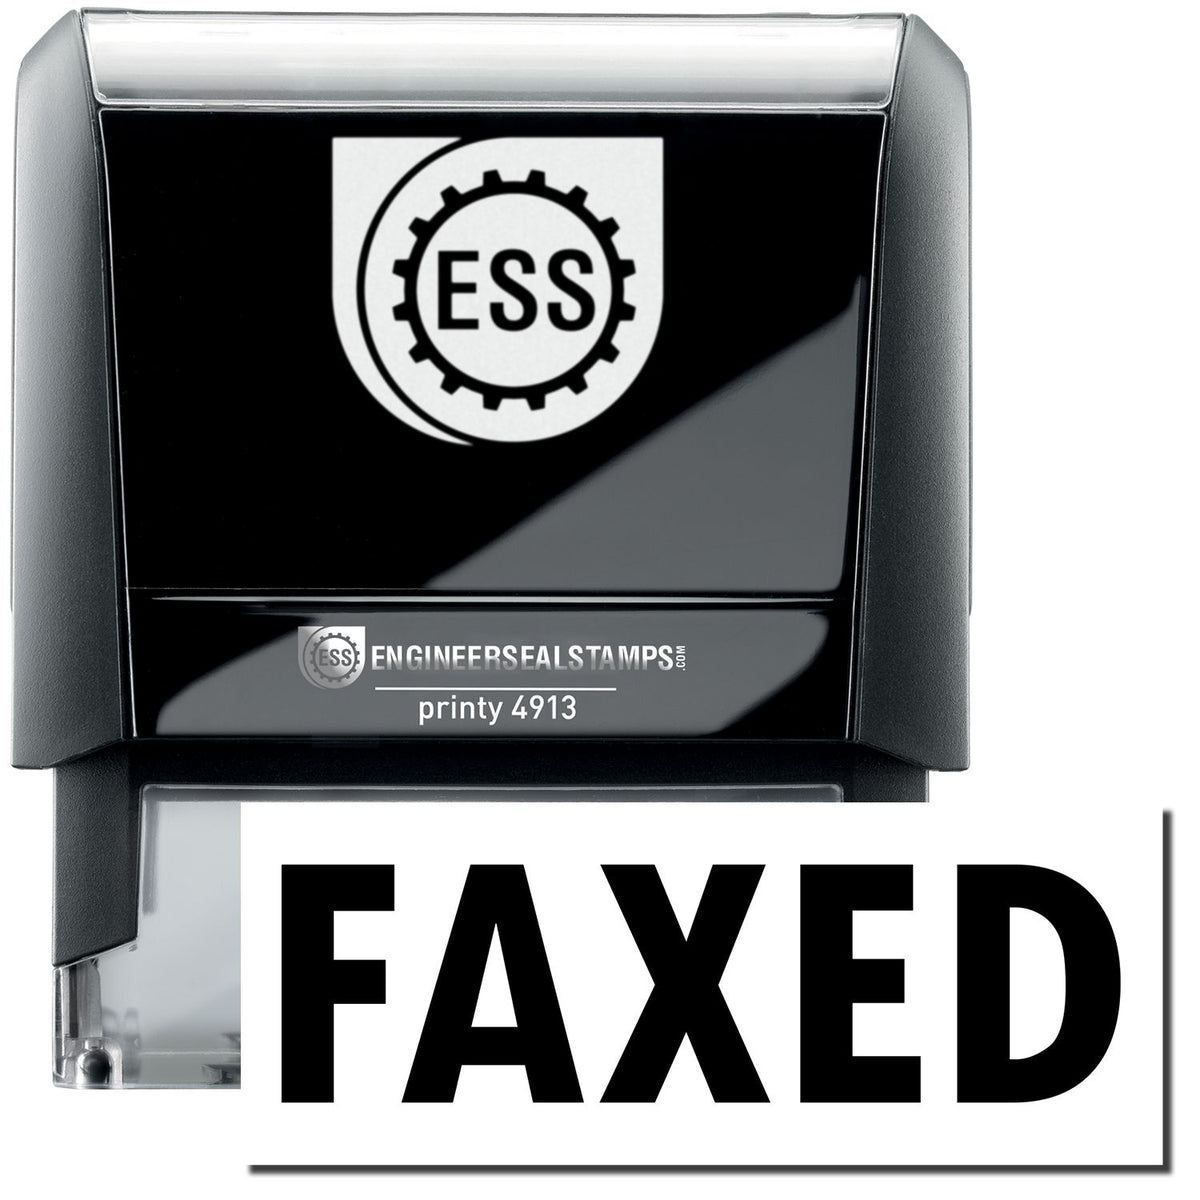 A self-inking stamp with a stamped image showing how the text &quot;FAXED&quot; in a large bold font is displayed by it.